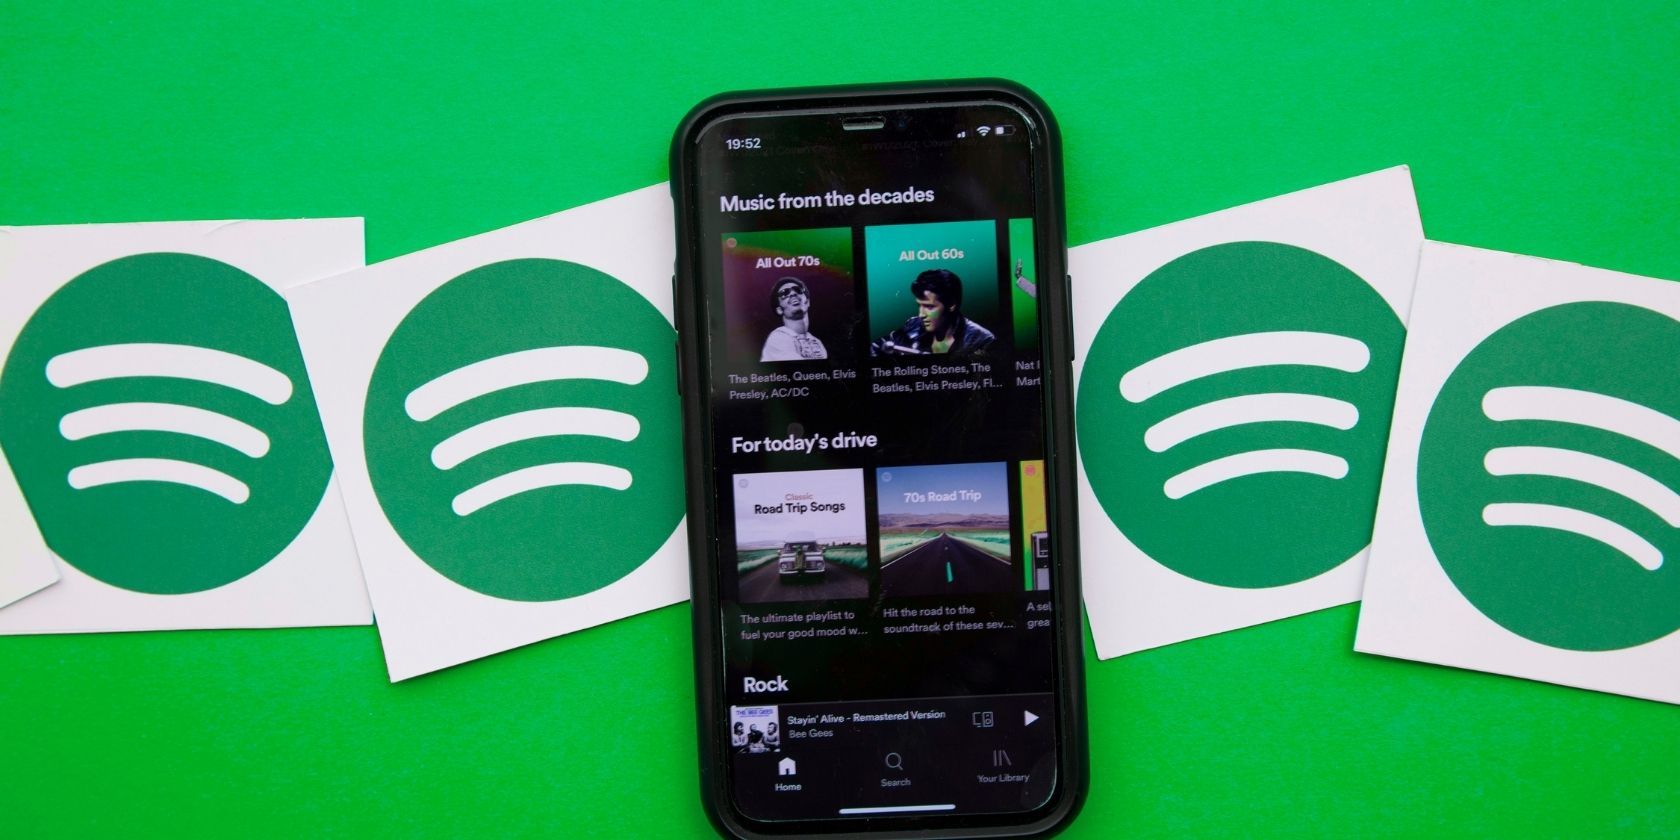 Hey Spotify' is another hands-free way to control your music